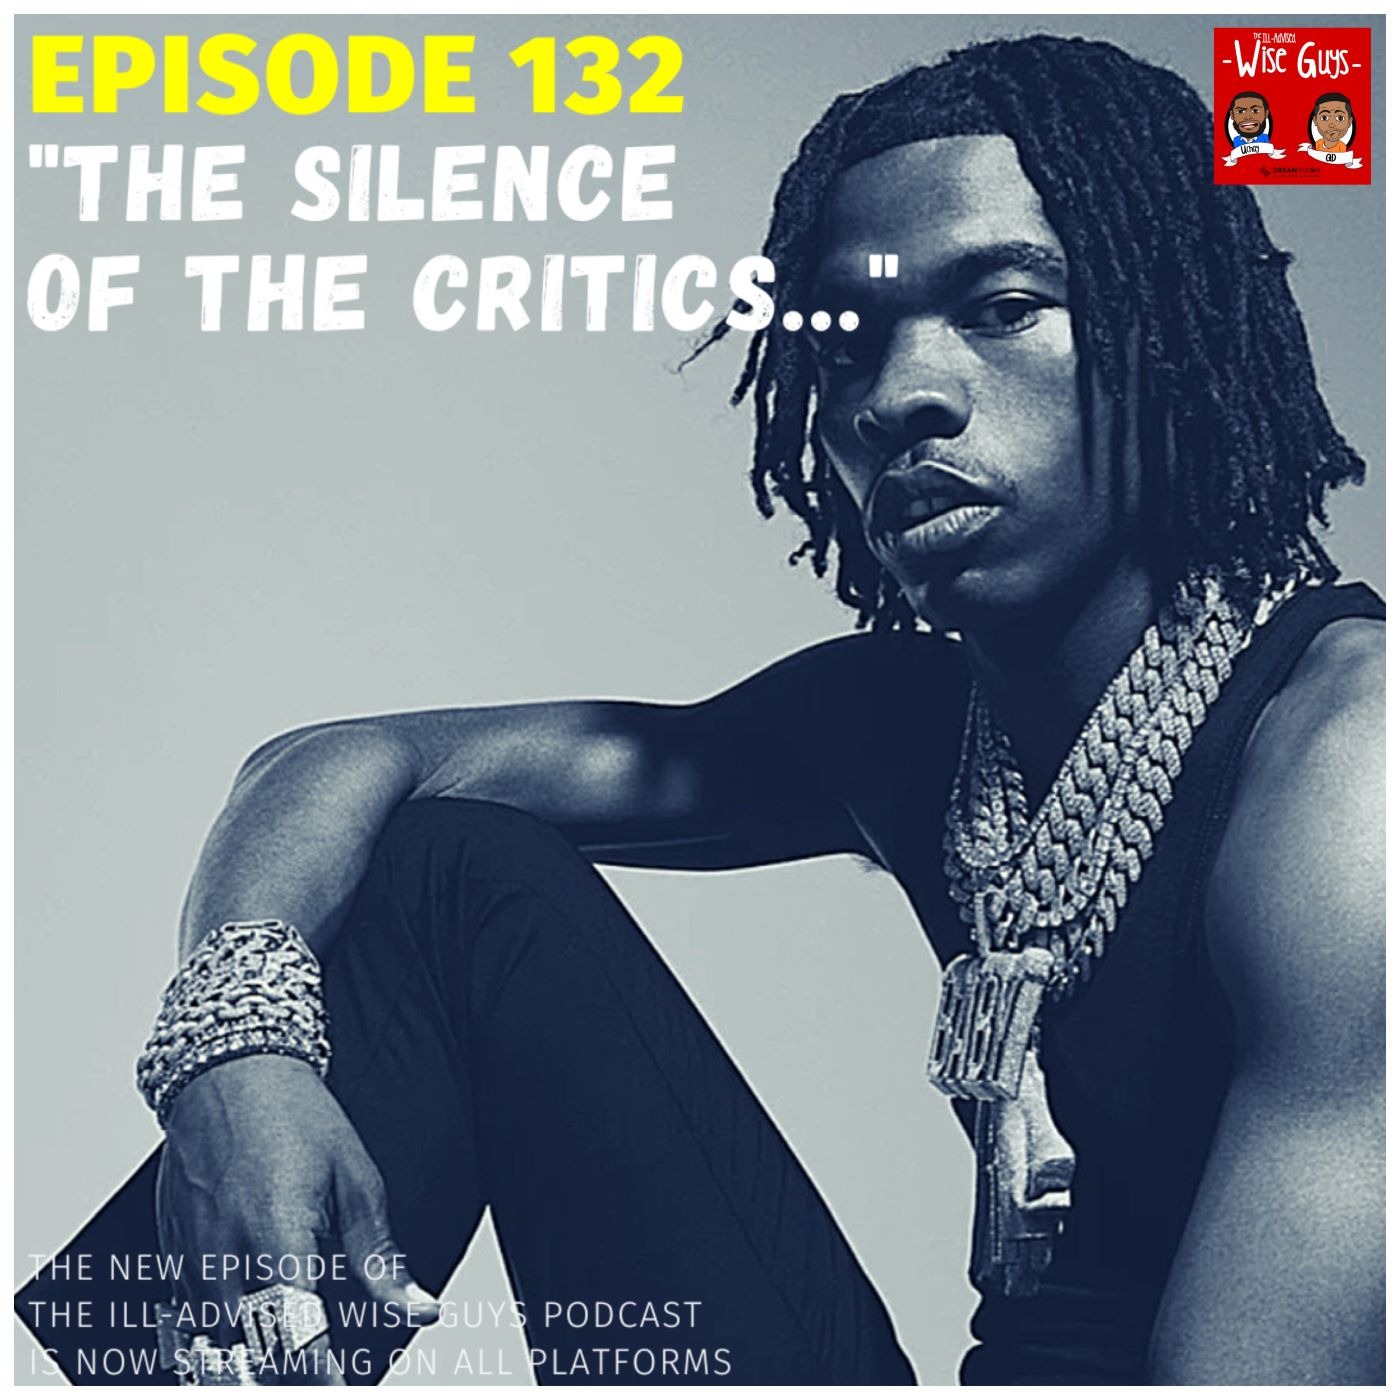 Episode 132 - "The Silence of the Critics..." Image